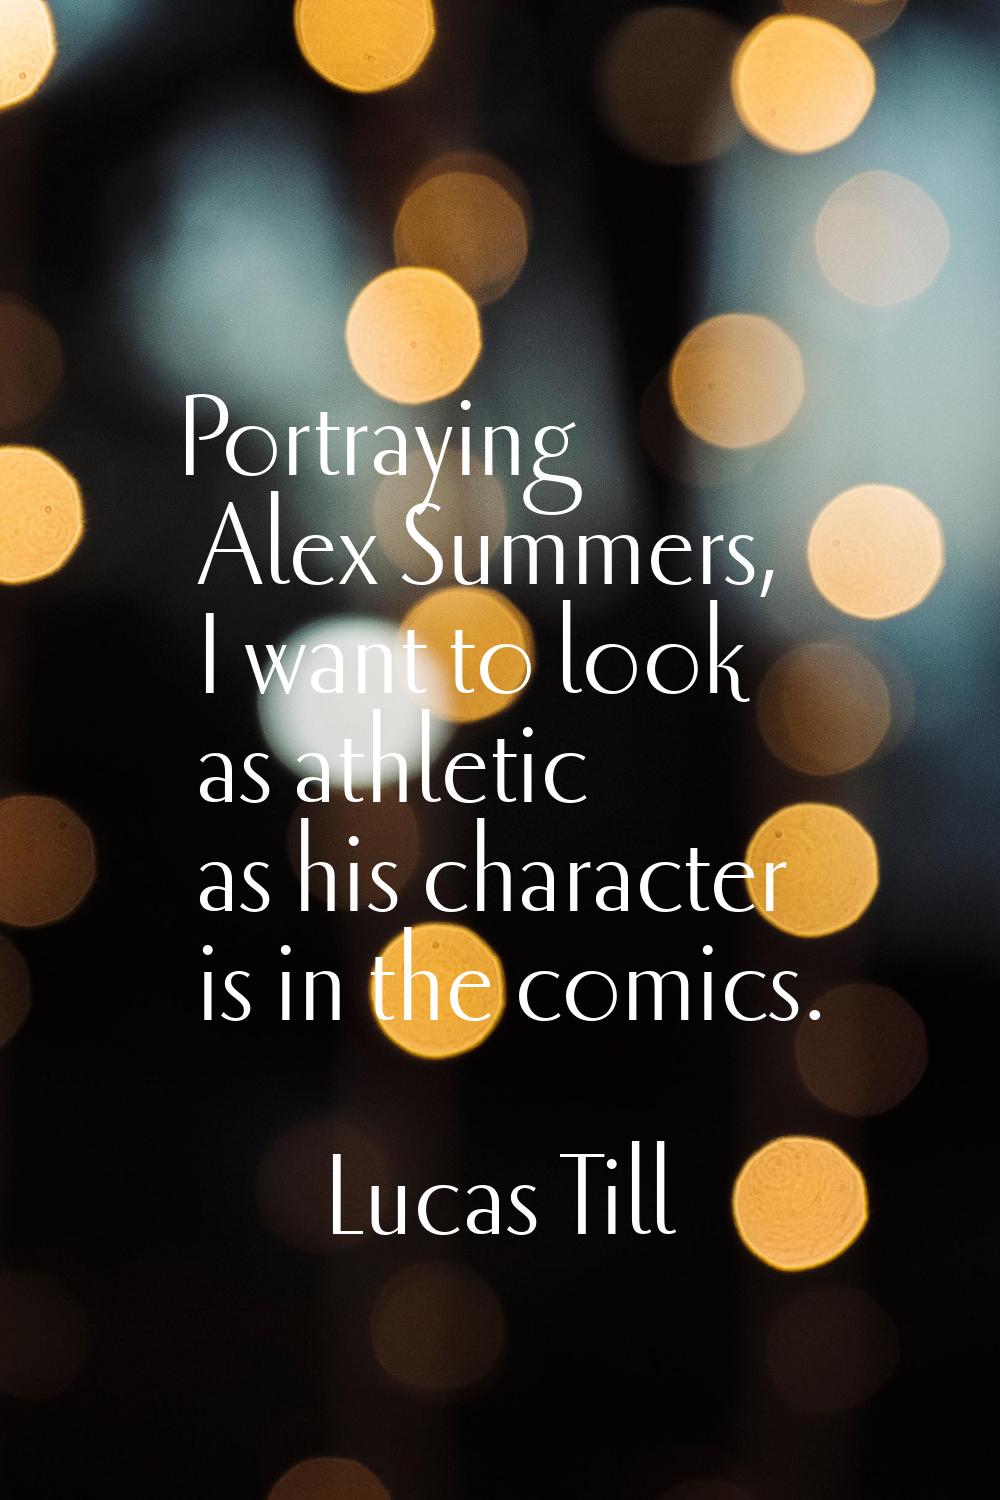 Portraying Alex Summers, I want to look as athletic as his character is in the comics.